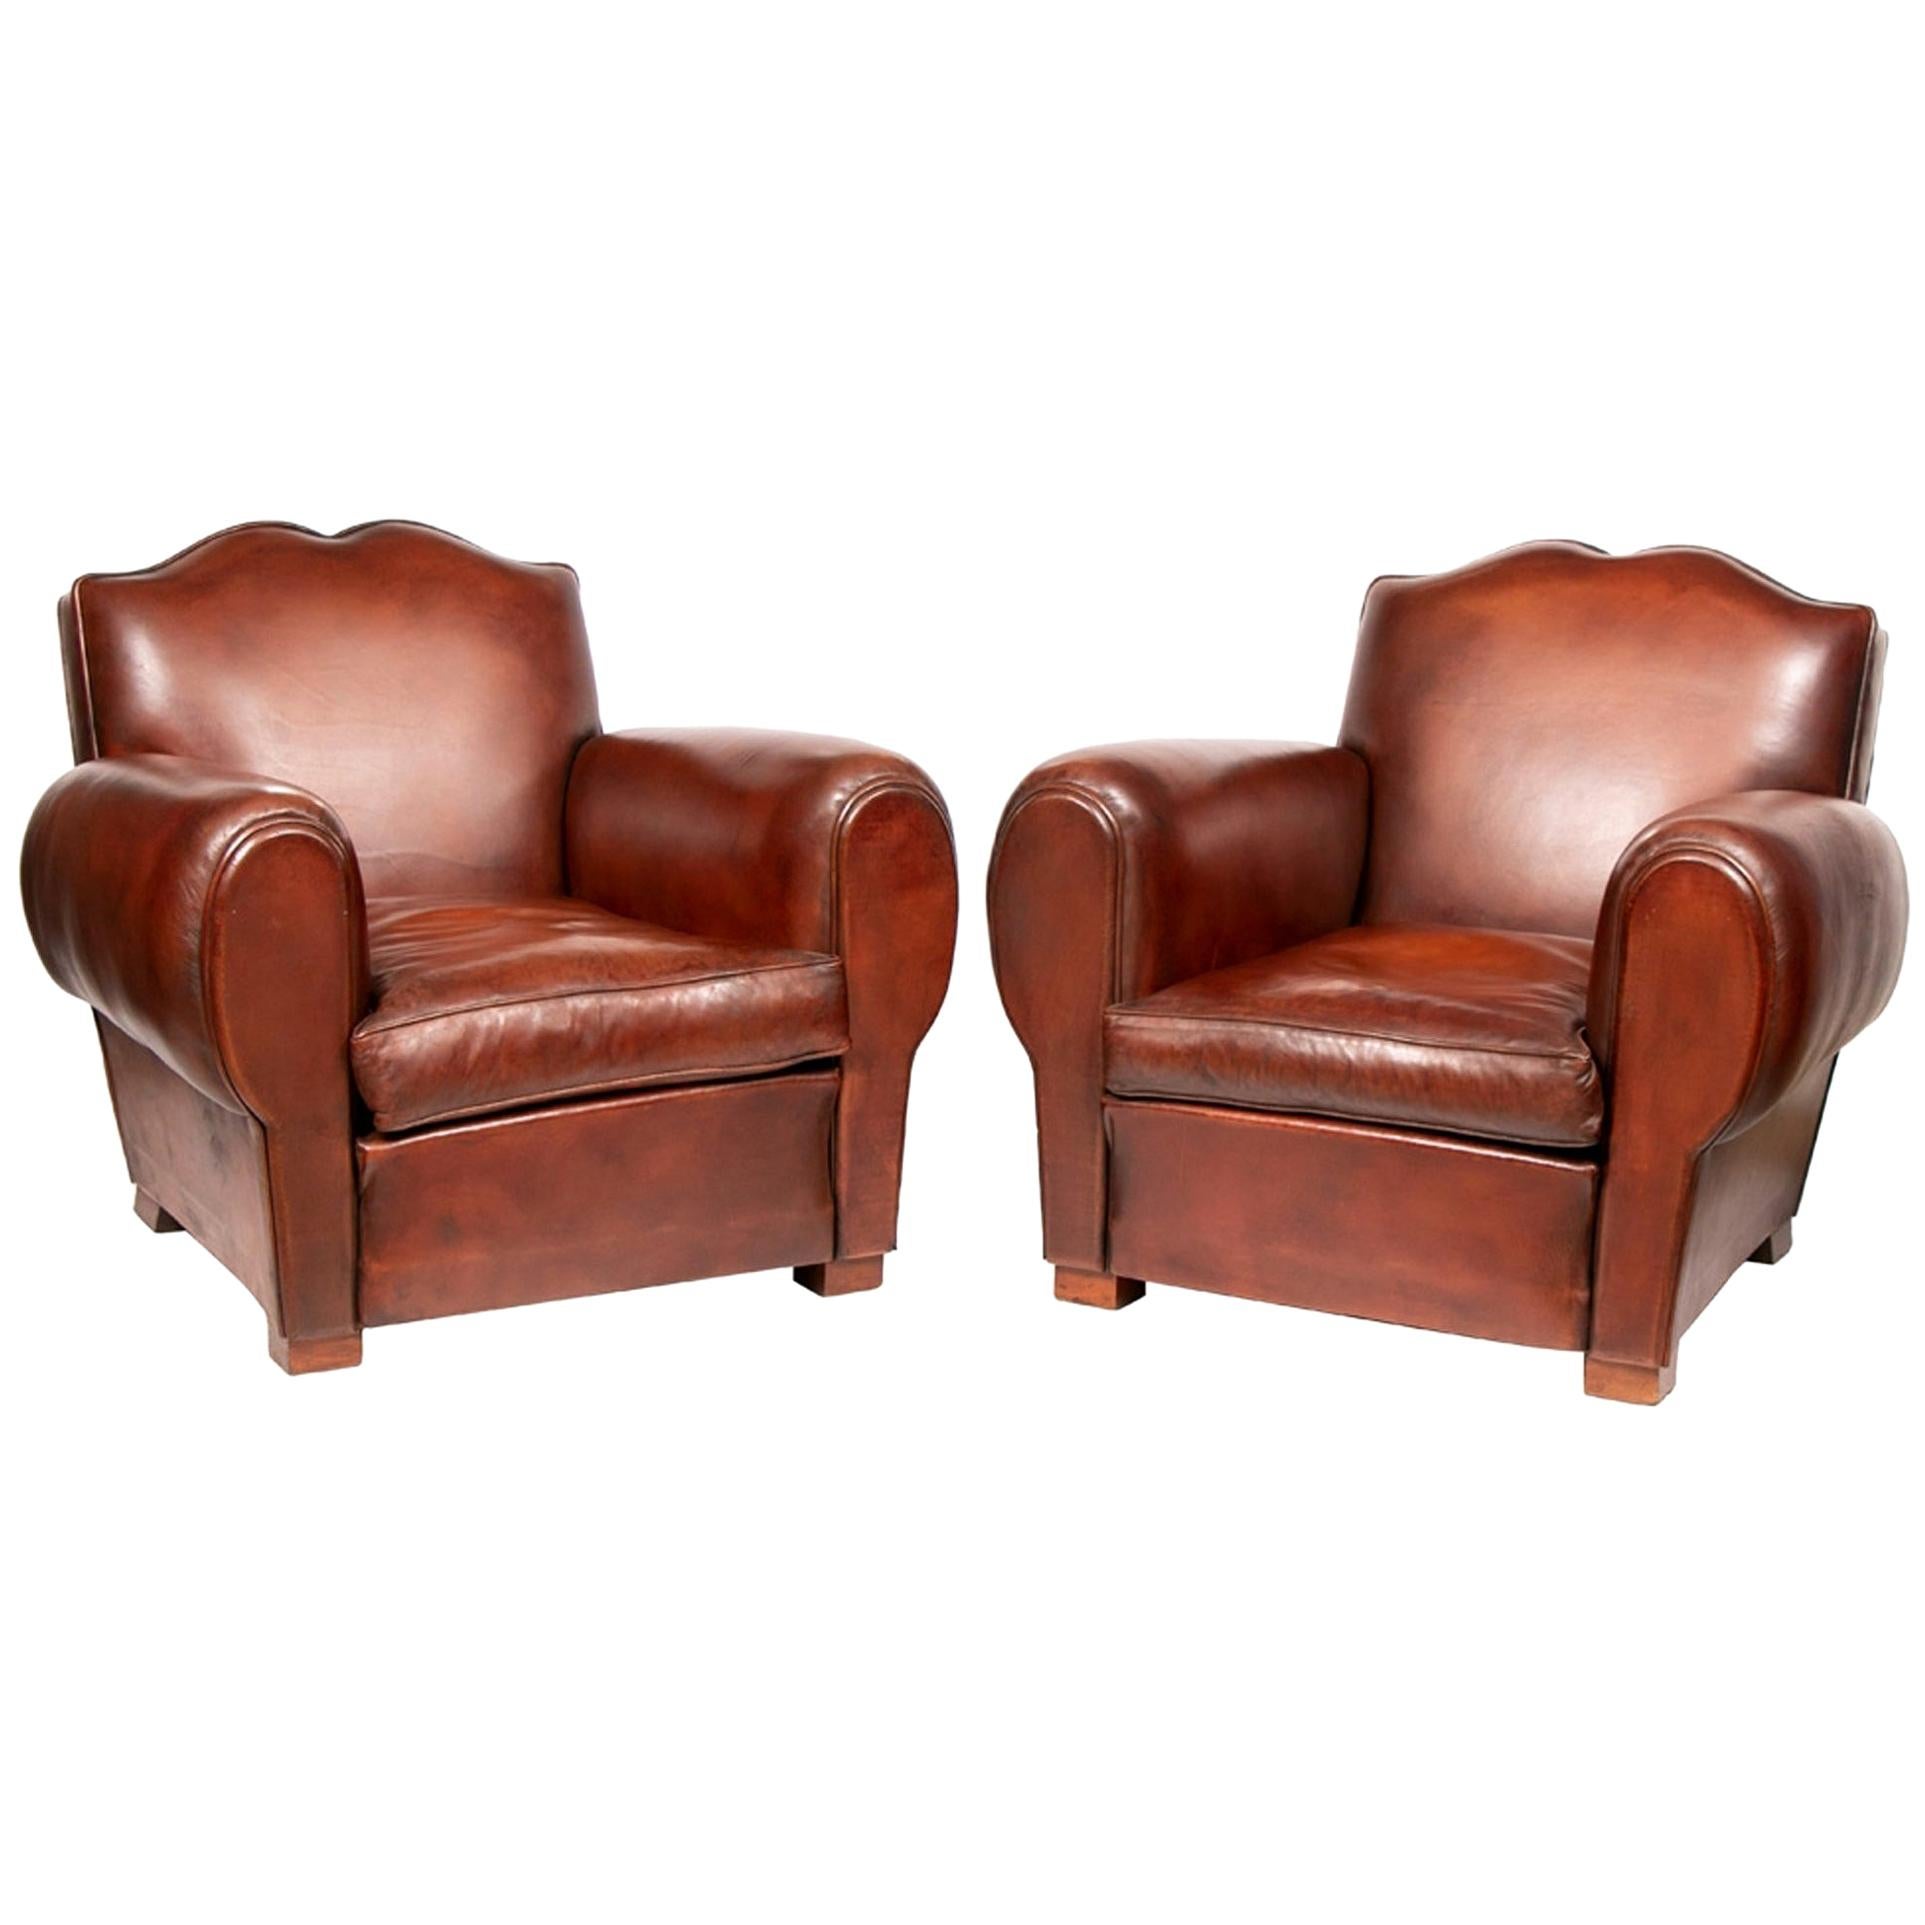 Pair of French 1930s Chocolate Brown Leather "Moustache" Armchairs